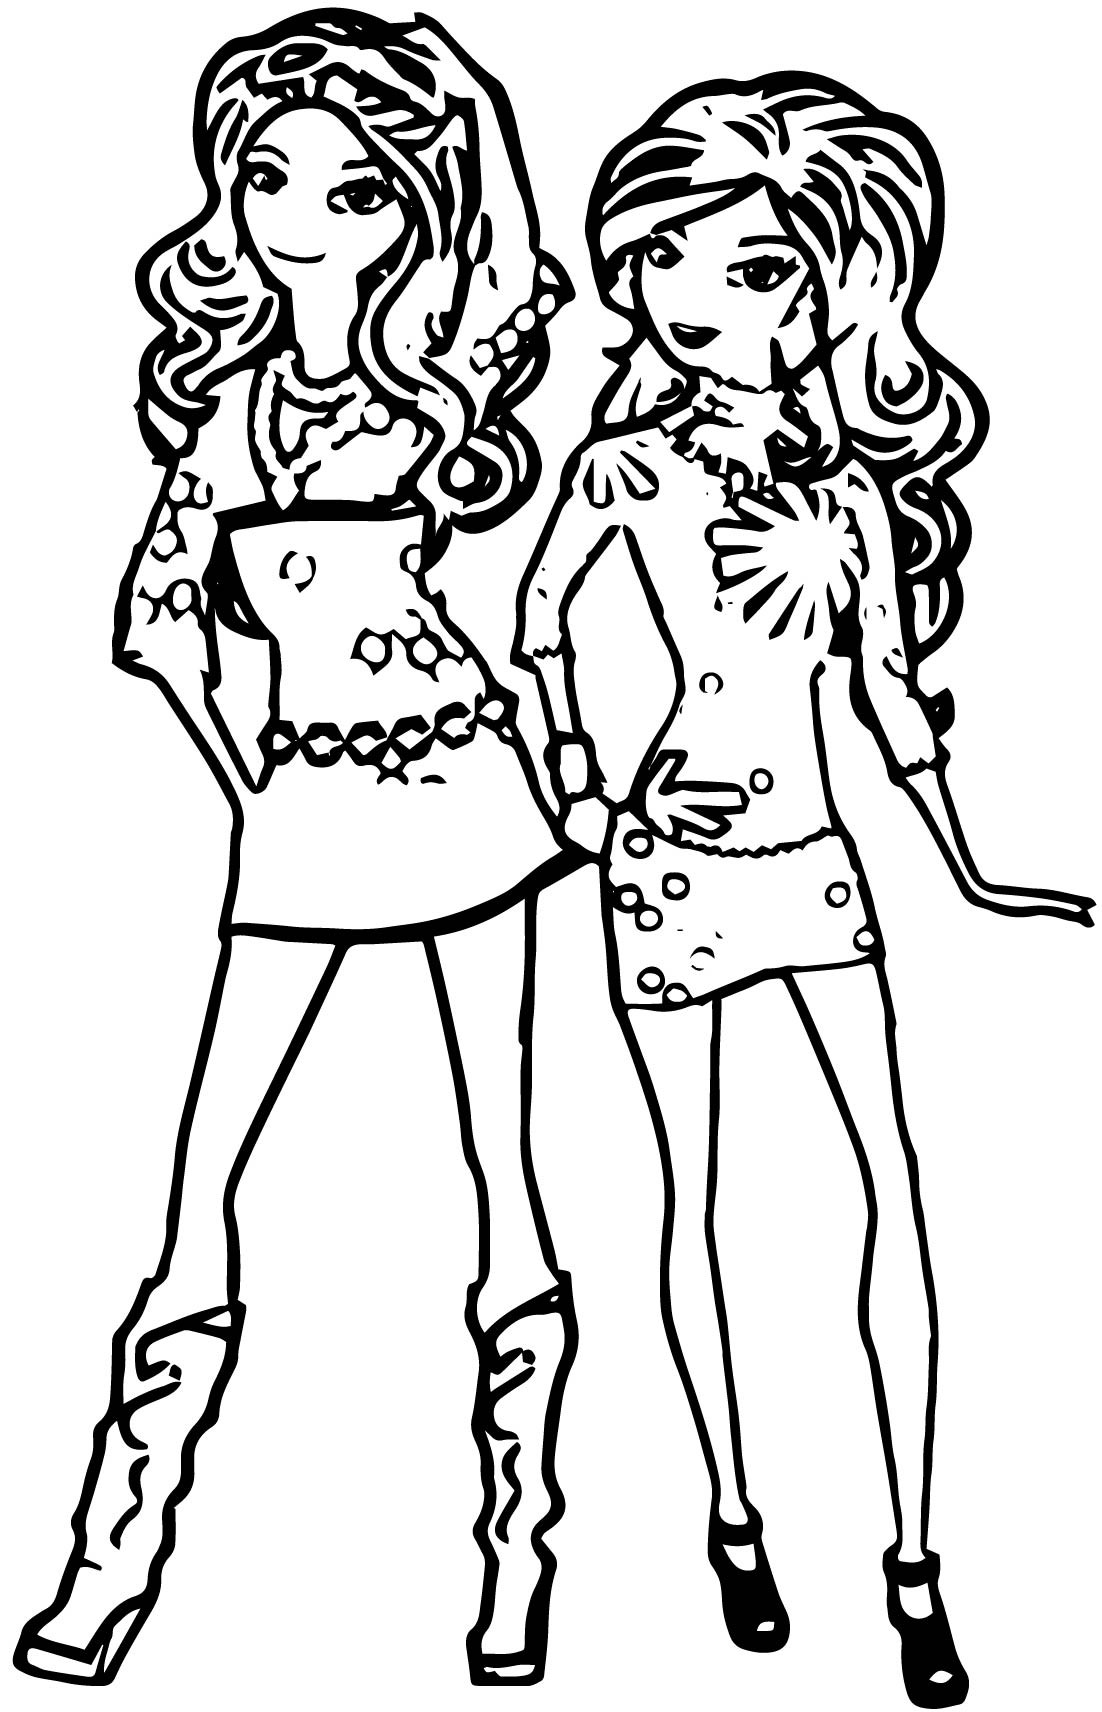 Best Friend Coloring Pages For Girls
 Lego Friends Coloring Pages